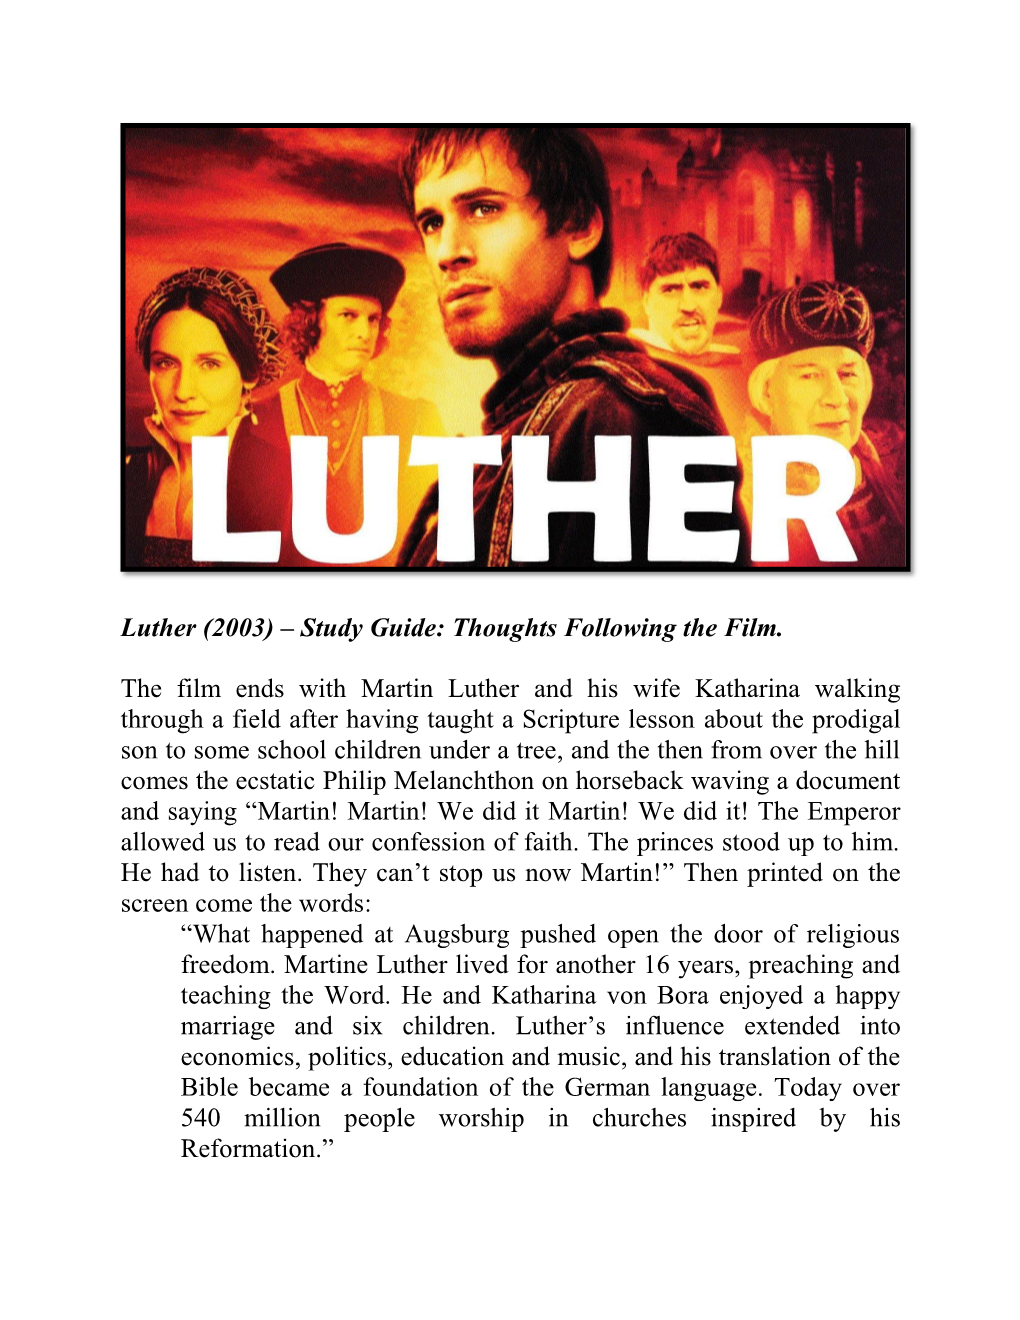 Luther (2003) – Study Guide: Thoughts Following the Film. The